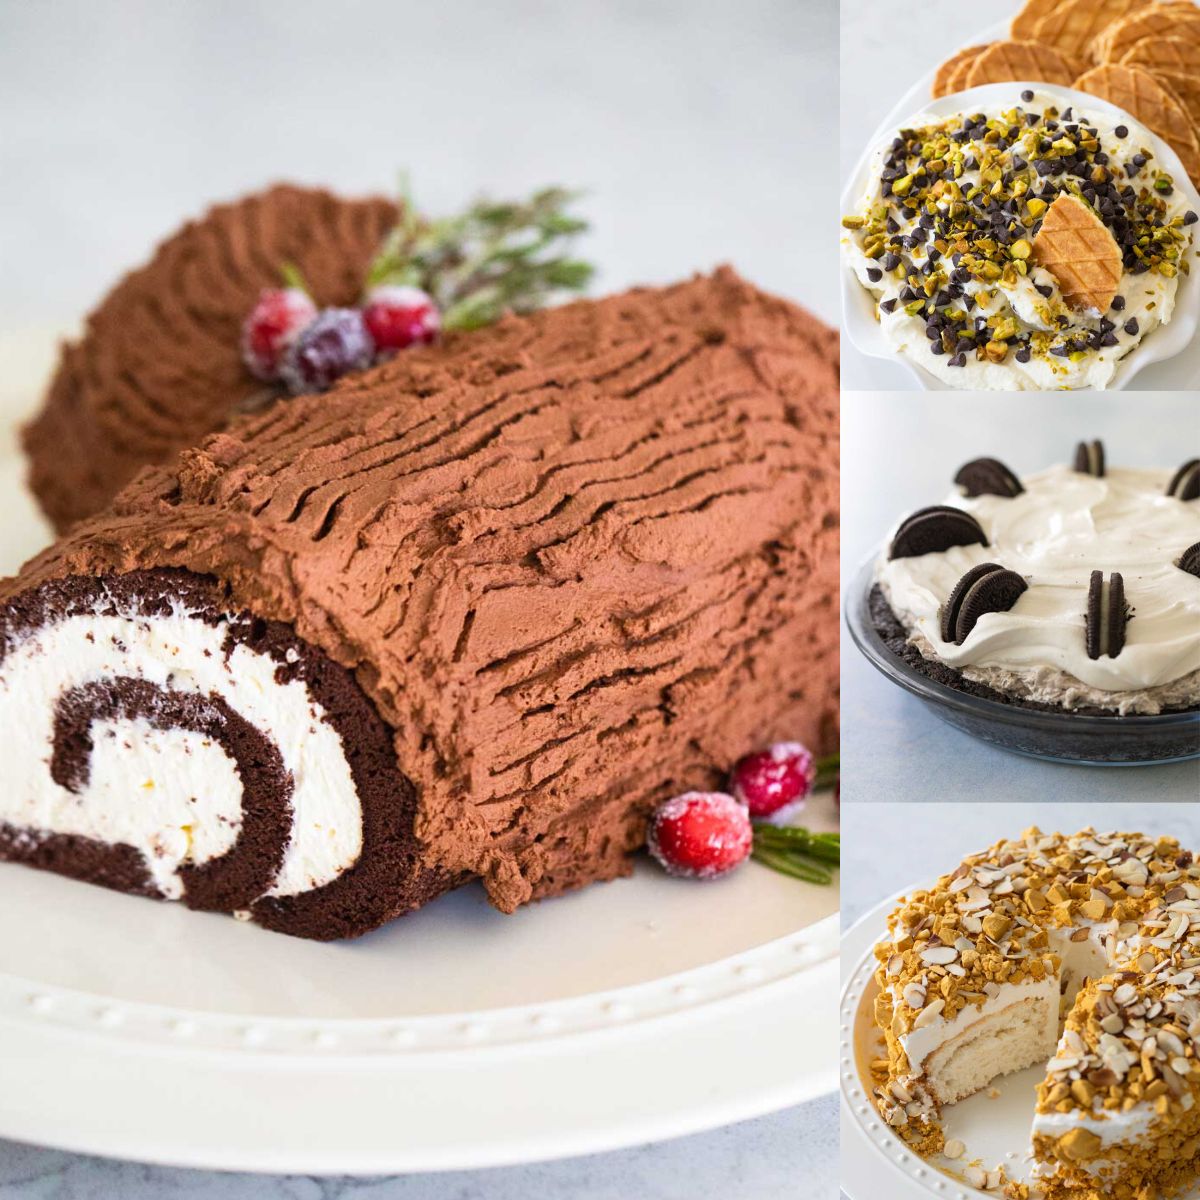 The photo collage shows a yule log, cannoli dip, oreo pie, and an almond crunch cake that are great Christmas desserts.